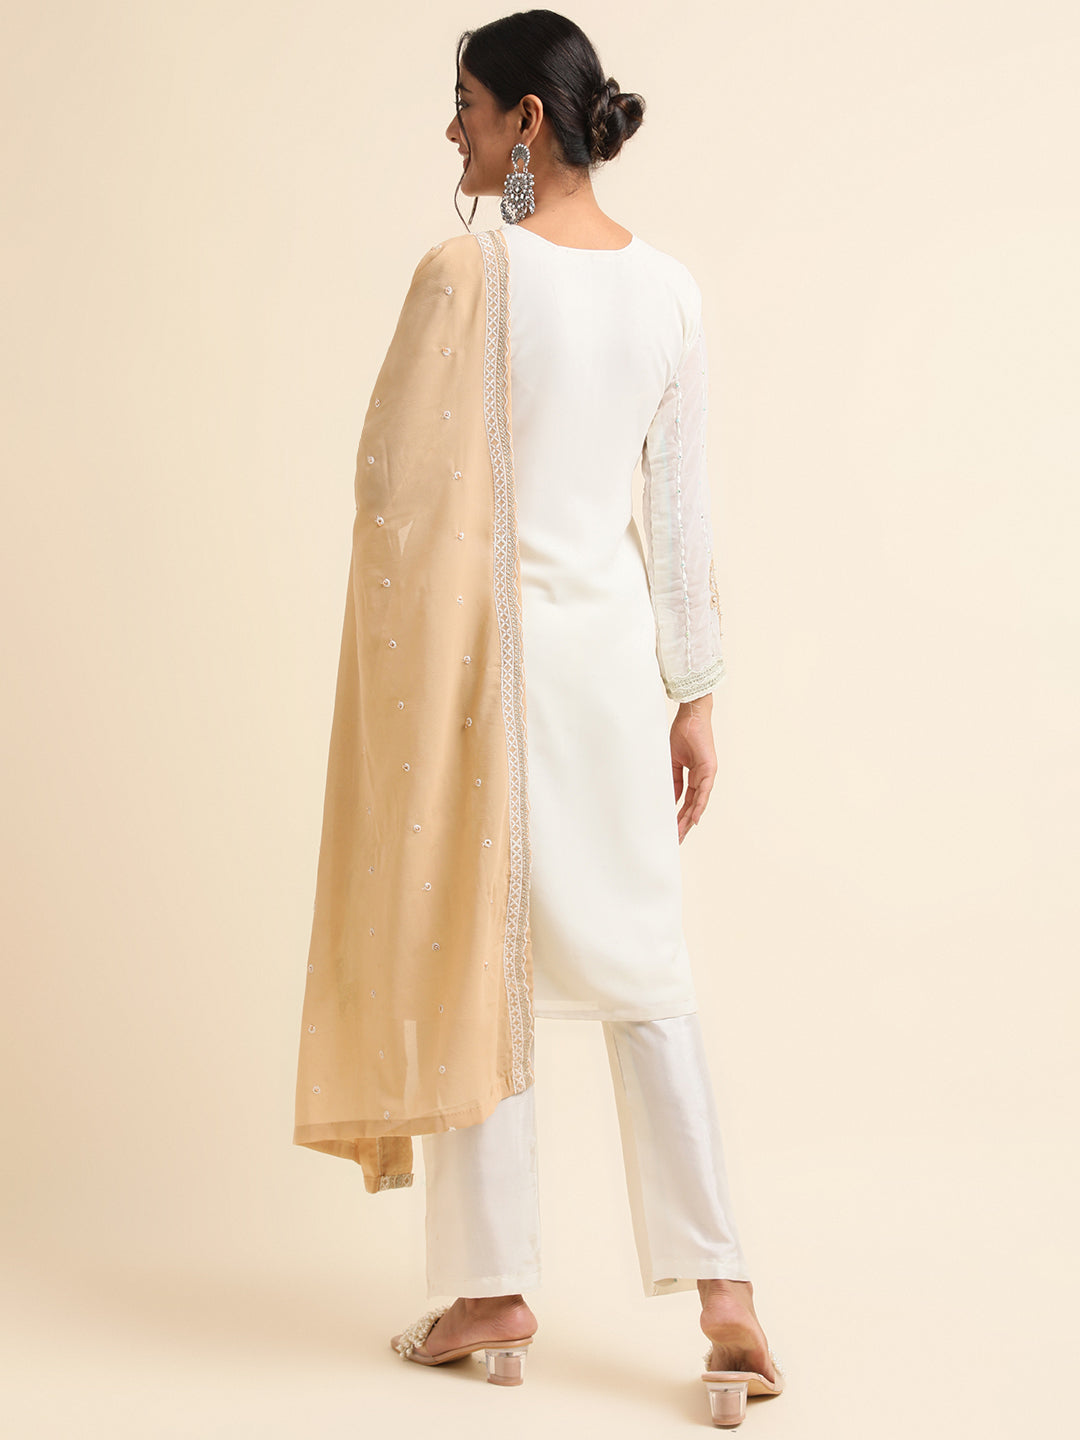 Embrace Timeless Elegance with Off-White Pakistani Suit